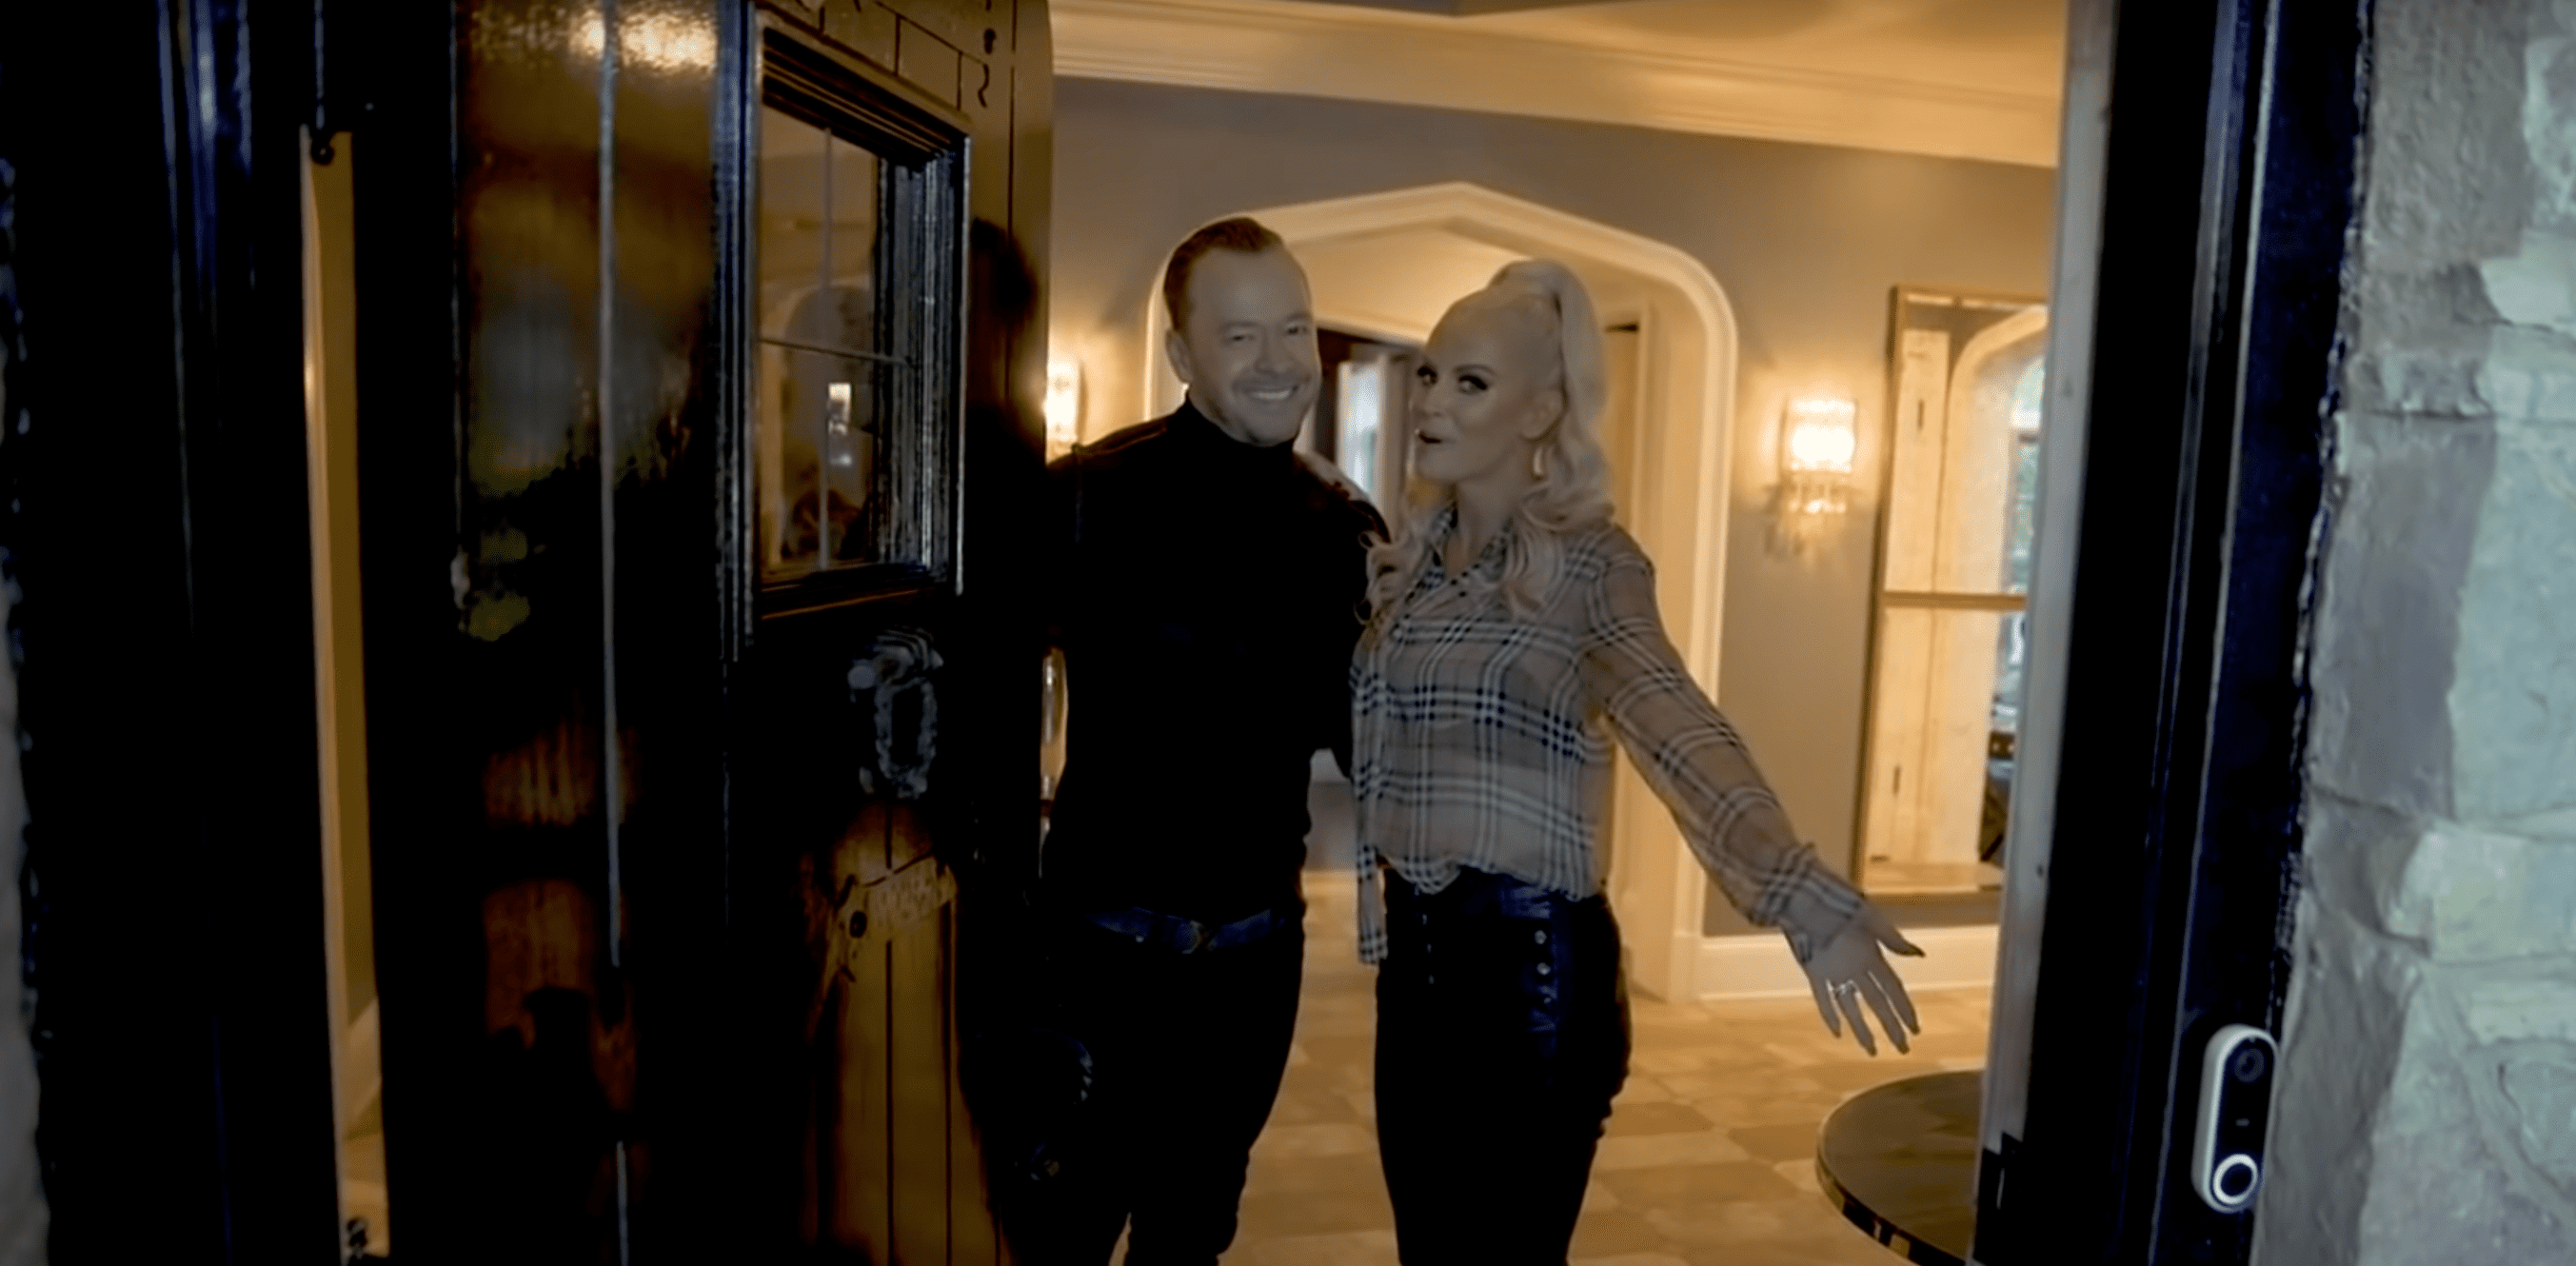 Jenny McCarthy and Donnie Wahlberg’s Chicago home | Source: Source: Youtube.com/people